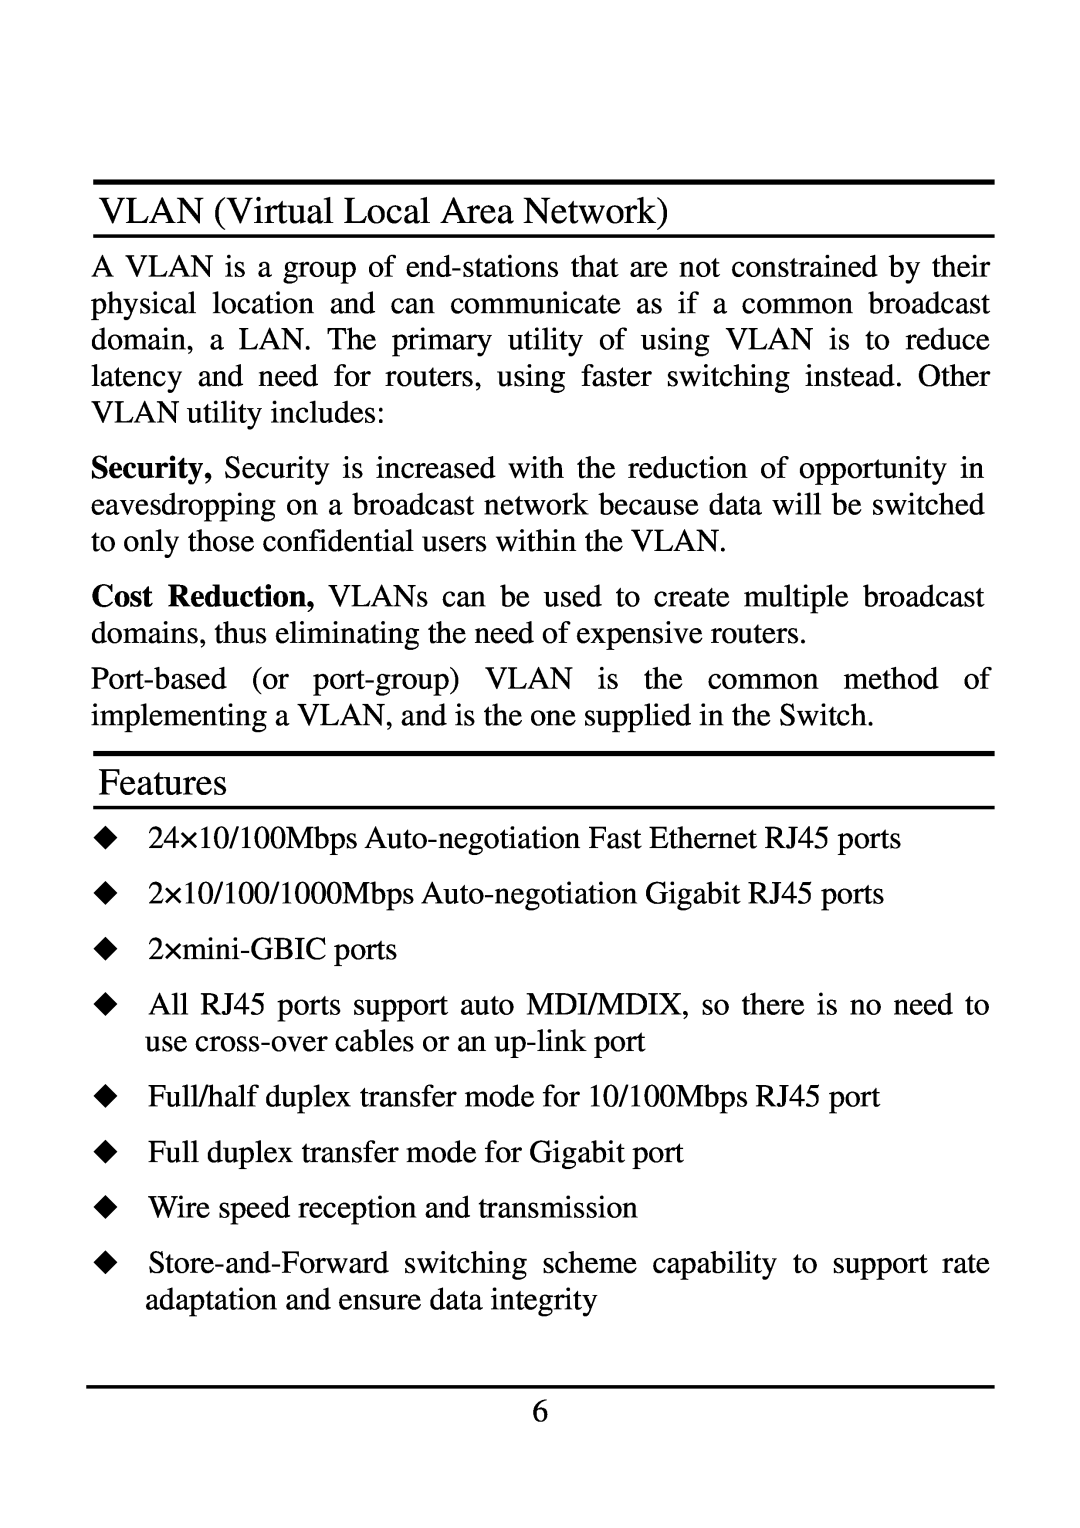 TRENDnet 2410/100BASE-TX, 21000BASE-T manual VLAN Virtual Local Area Network, Features 